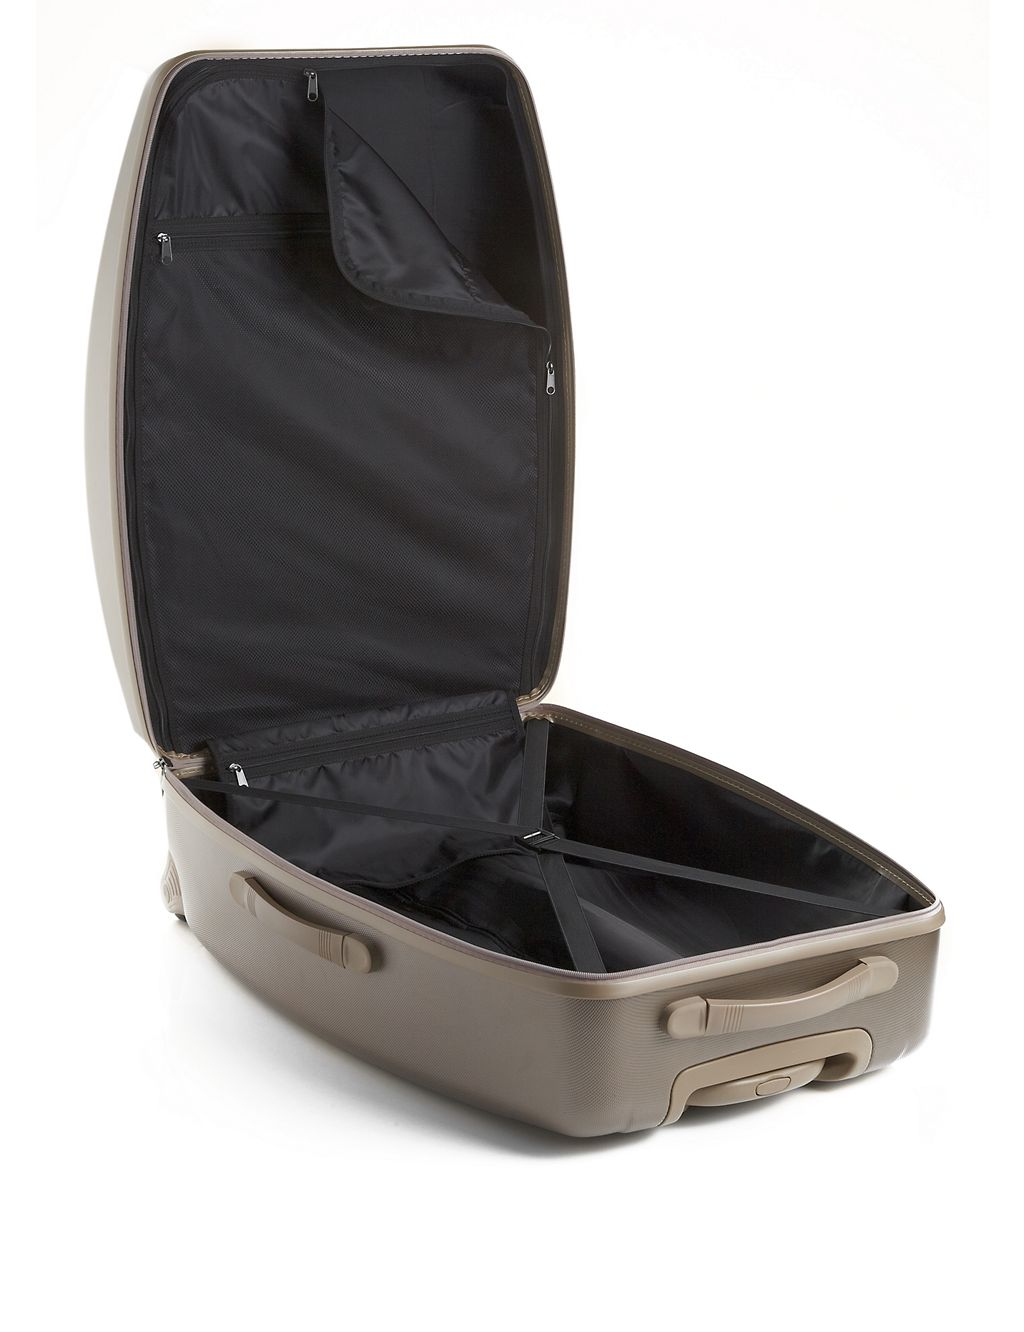 Longhaul ABS Wave Hard Rollercase - Large 1 of 4